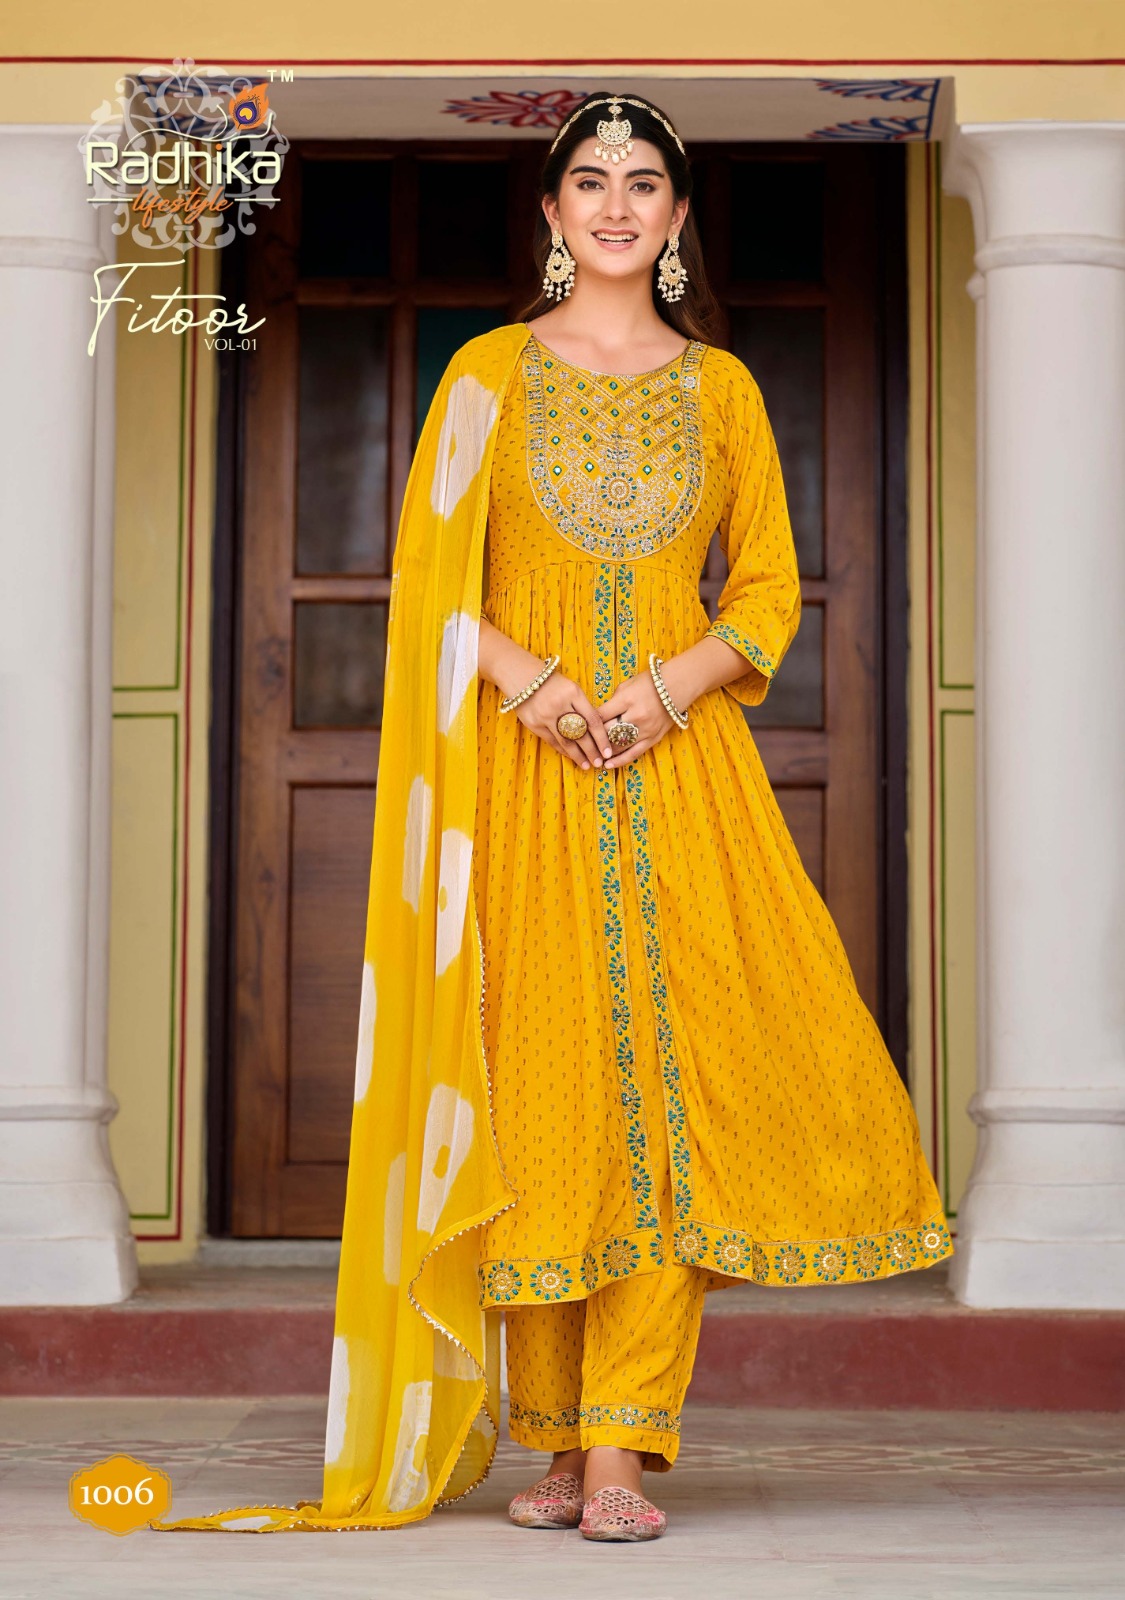 Radhika Fitoor 1 collection 3